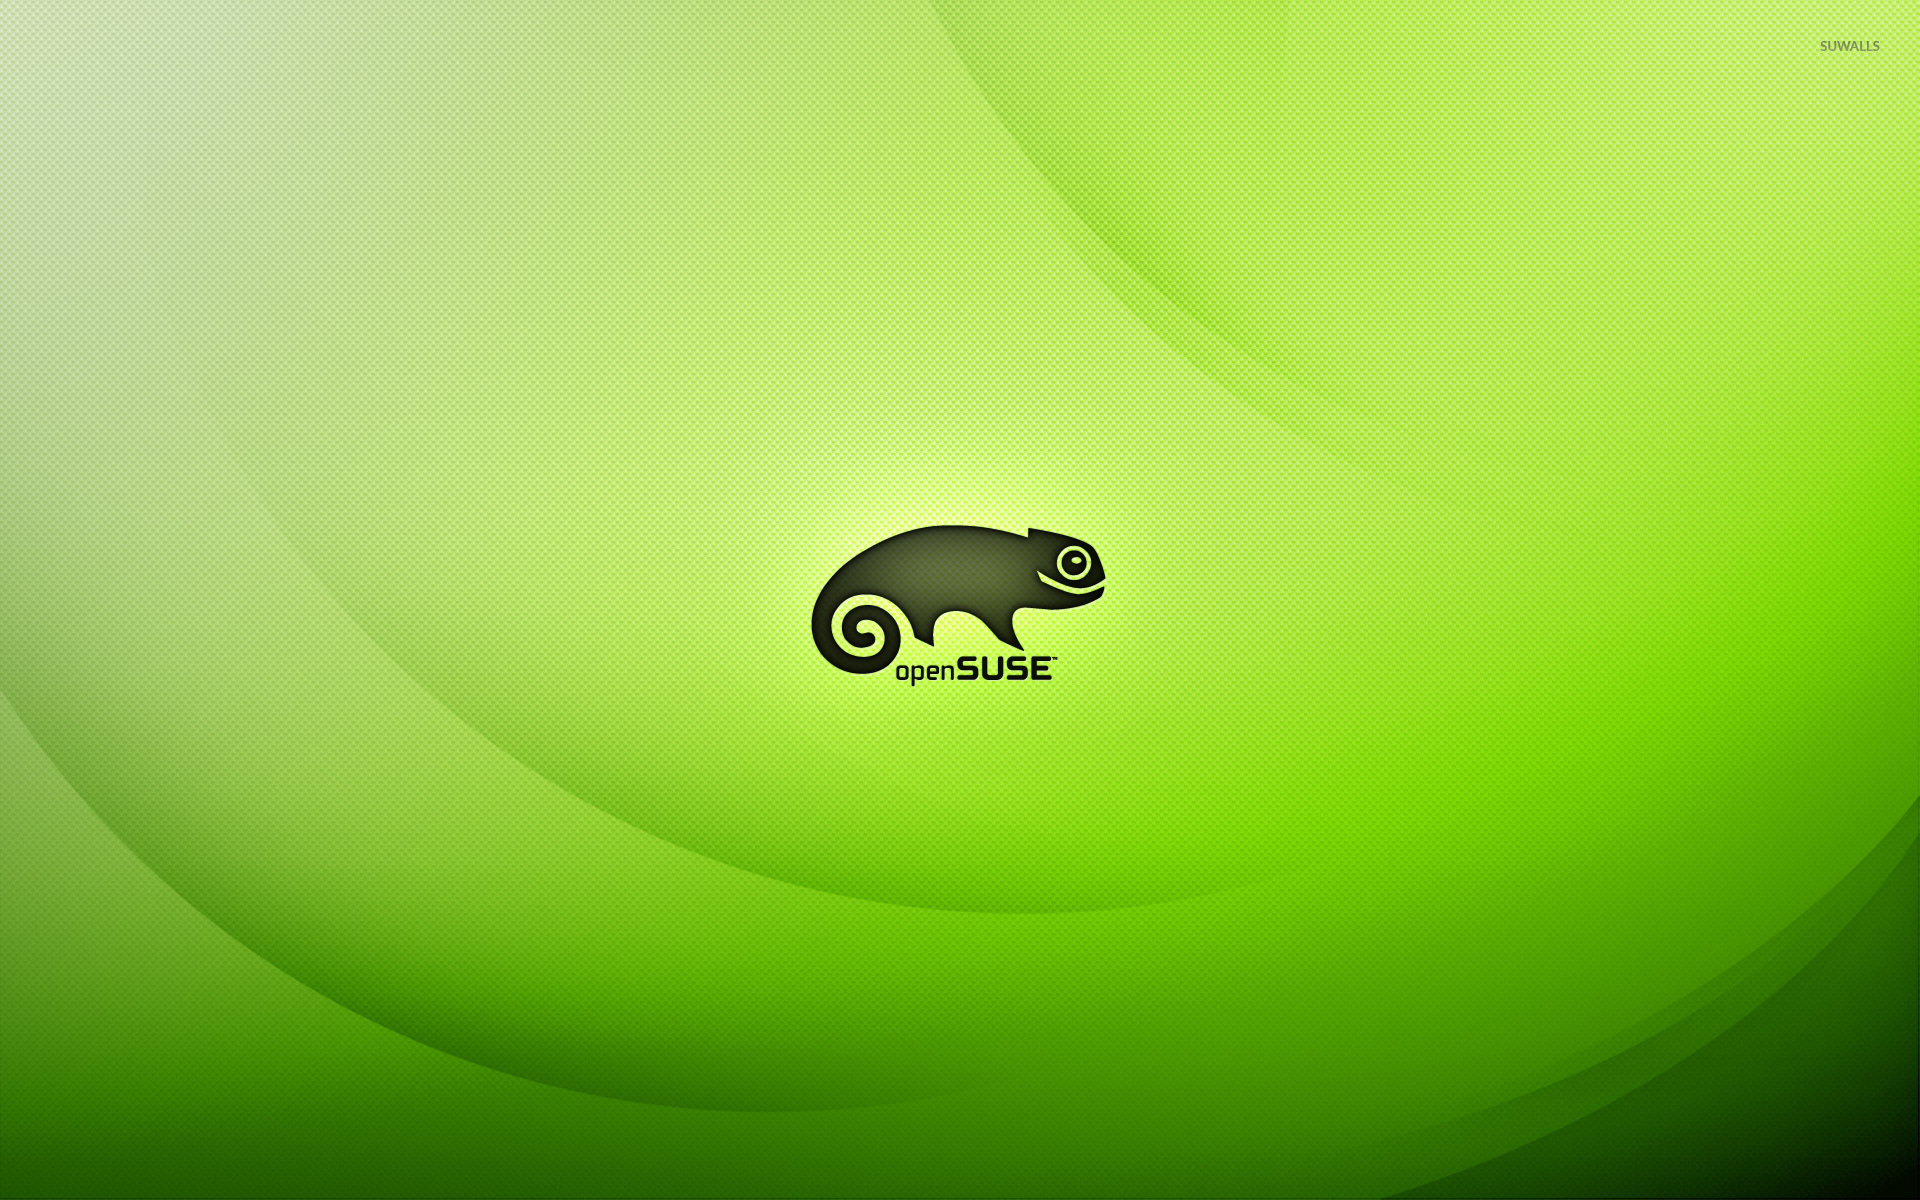 Opensuse Wallpaper Puter